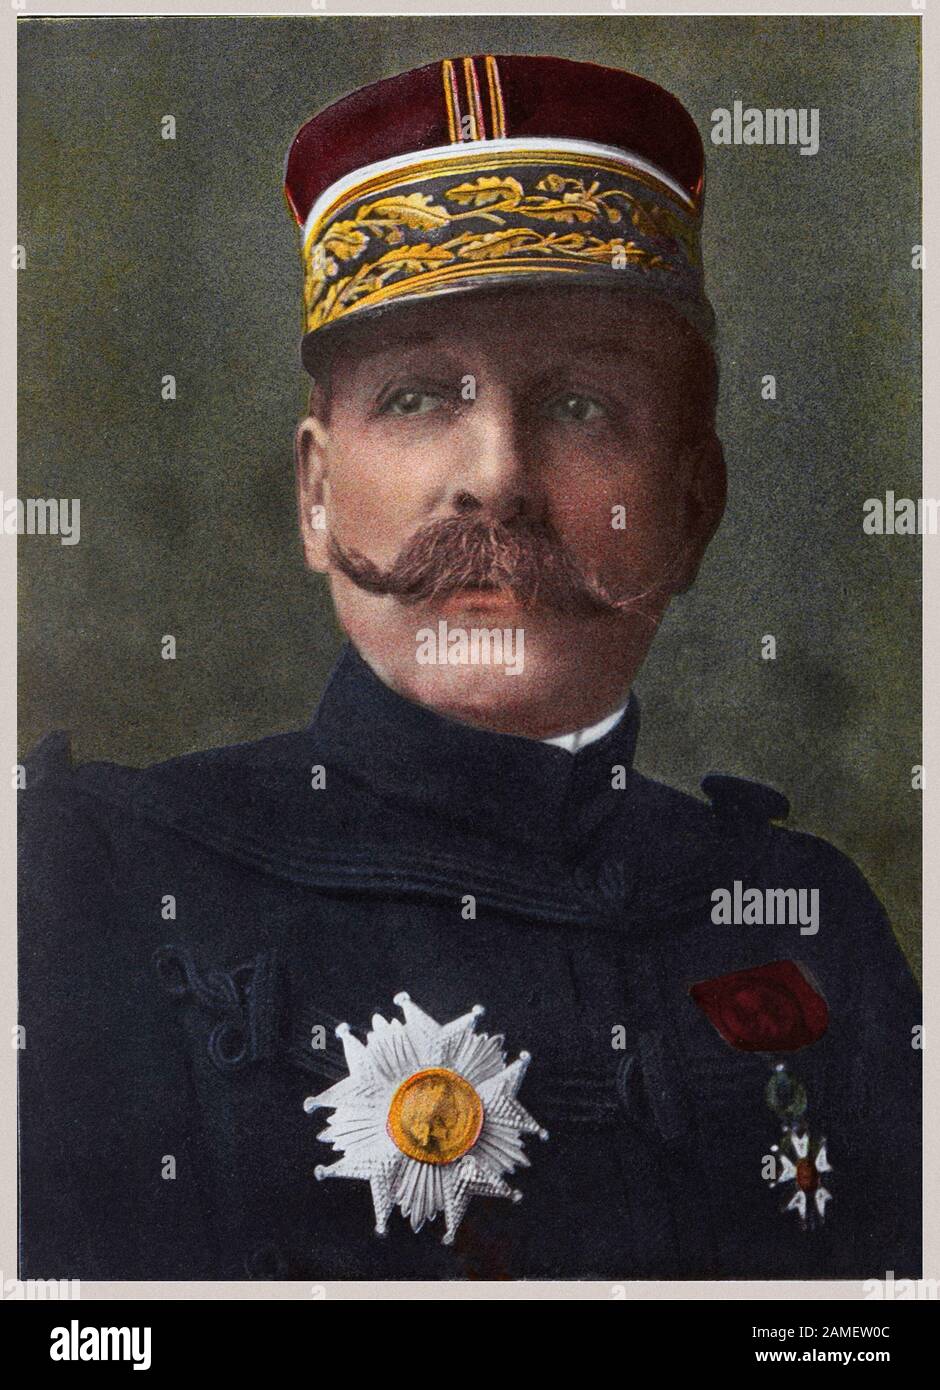 Augustin Yvon Edmond Dubail (1851 – 1934) was a French Army general. He commanded the First Army and Army Group East during World War I. Stock Photo